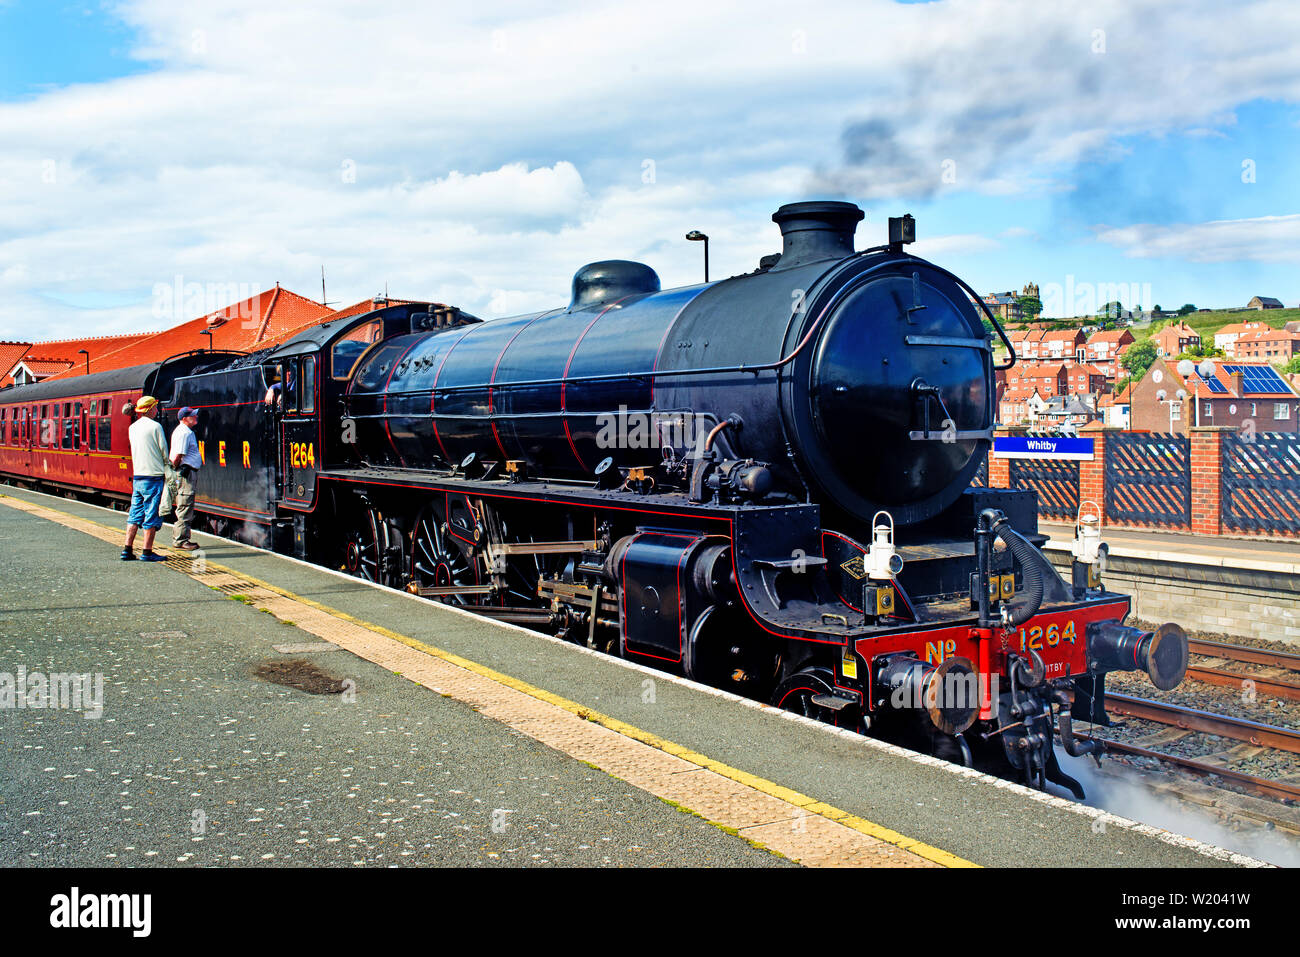 LNER B1 Class No 1264 at Whitby Town Railway Station, Whitby, North Yorkshire, England Stock Photo